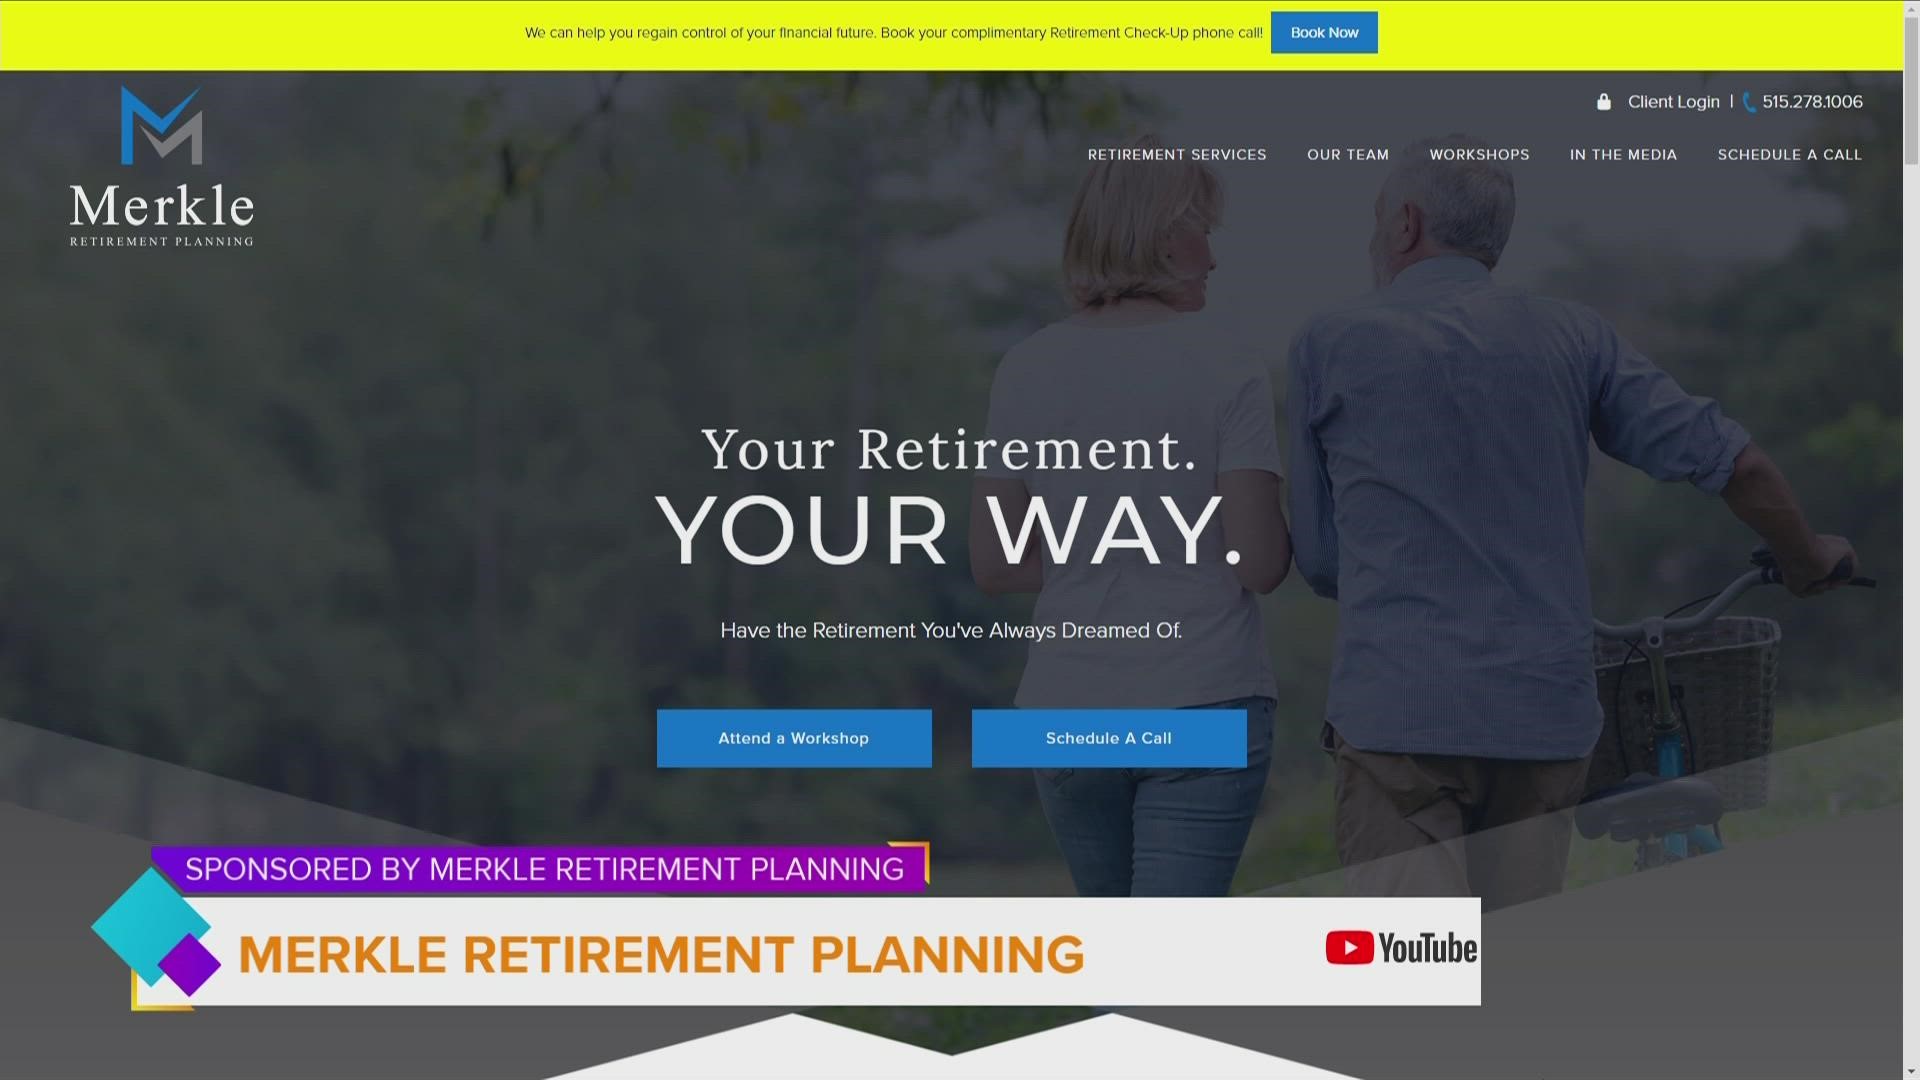 Loren Merkle/Merkle Retirement Planning discusses "100 minus your age" rule for your retirement plan & whether these "rules" are good ideas | Paid Content